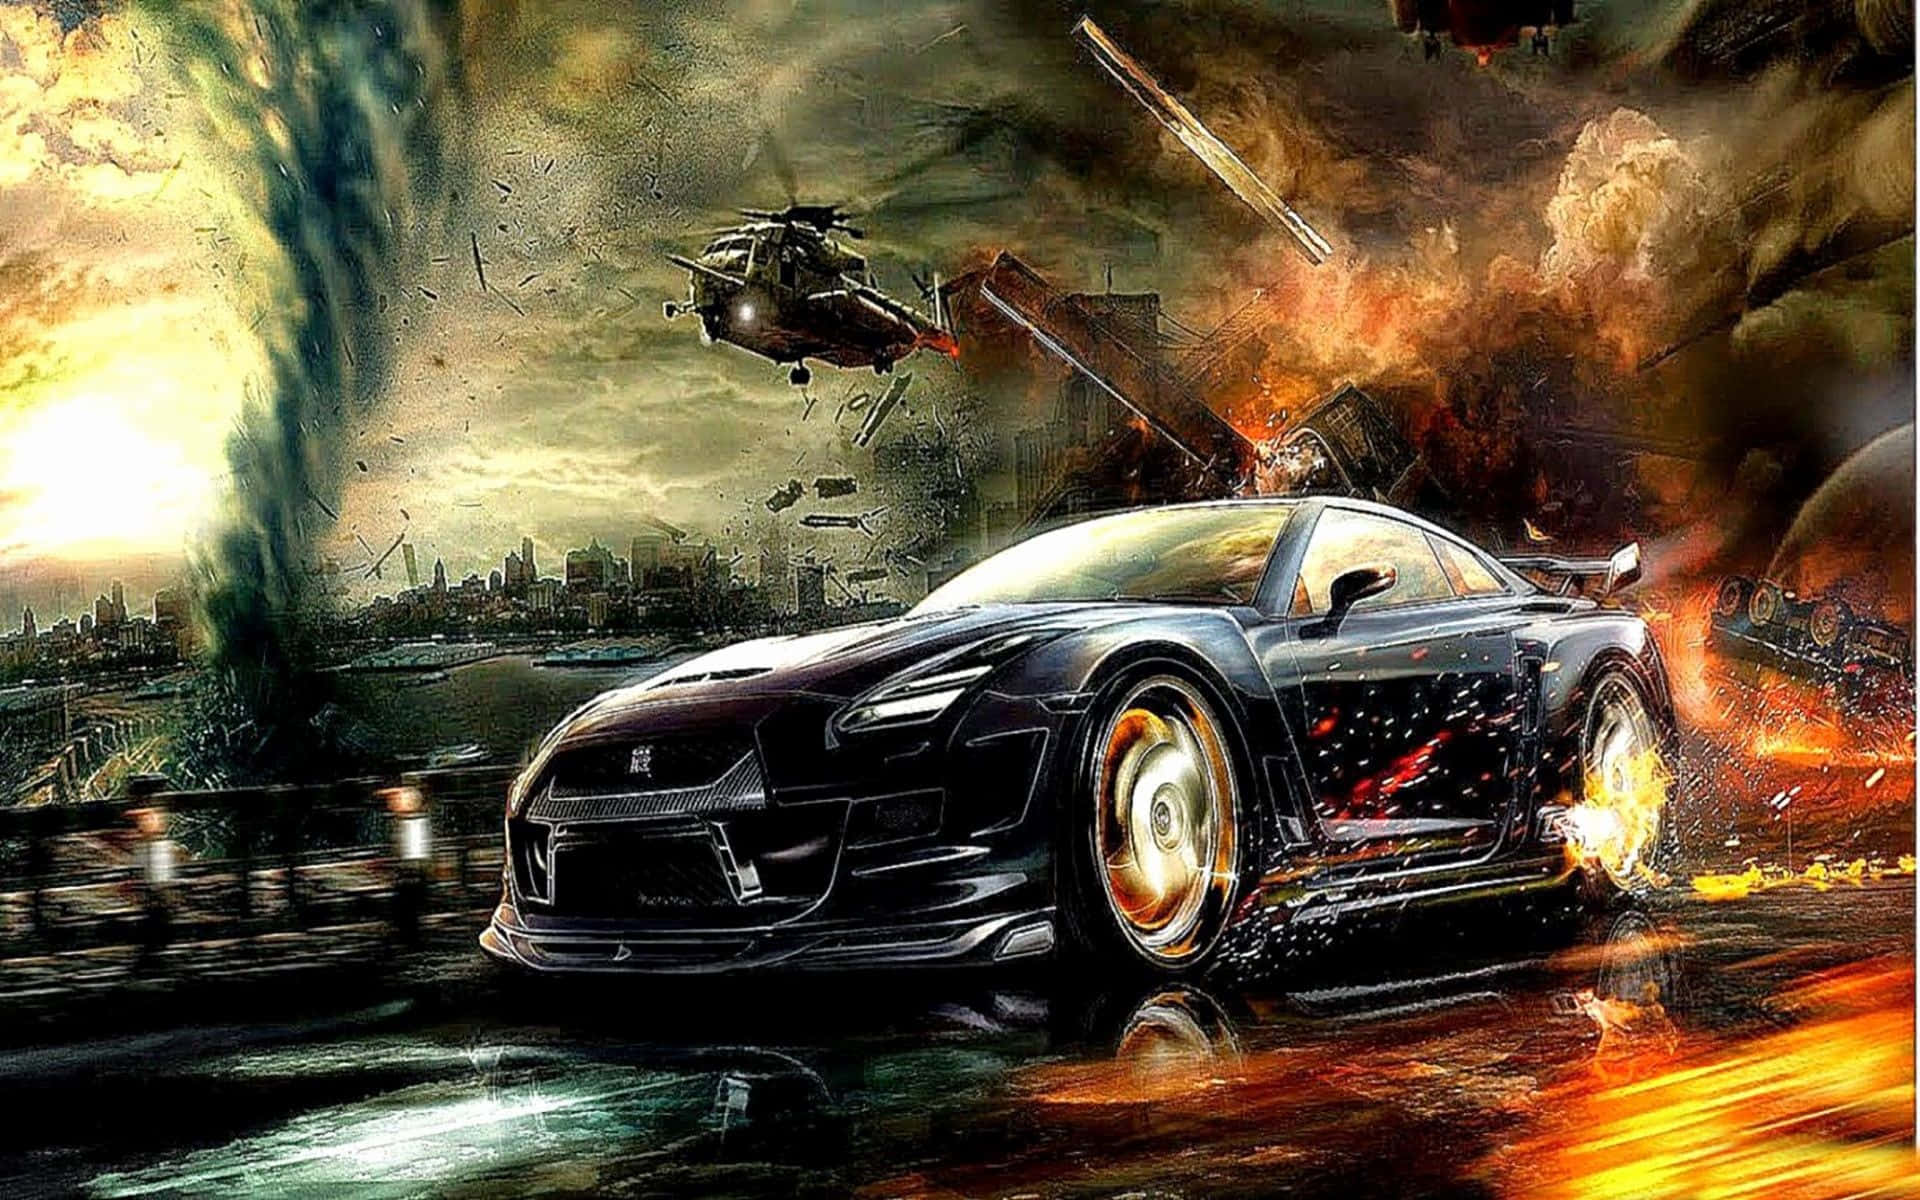 Street Racing Car Chased By Helicopter Wallpaper